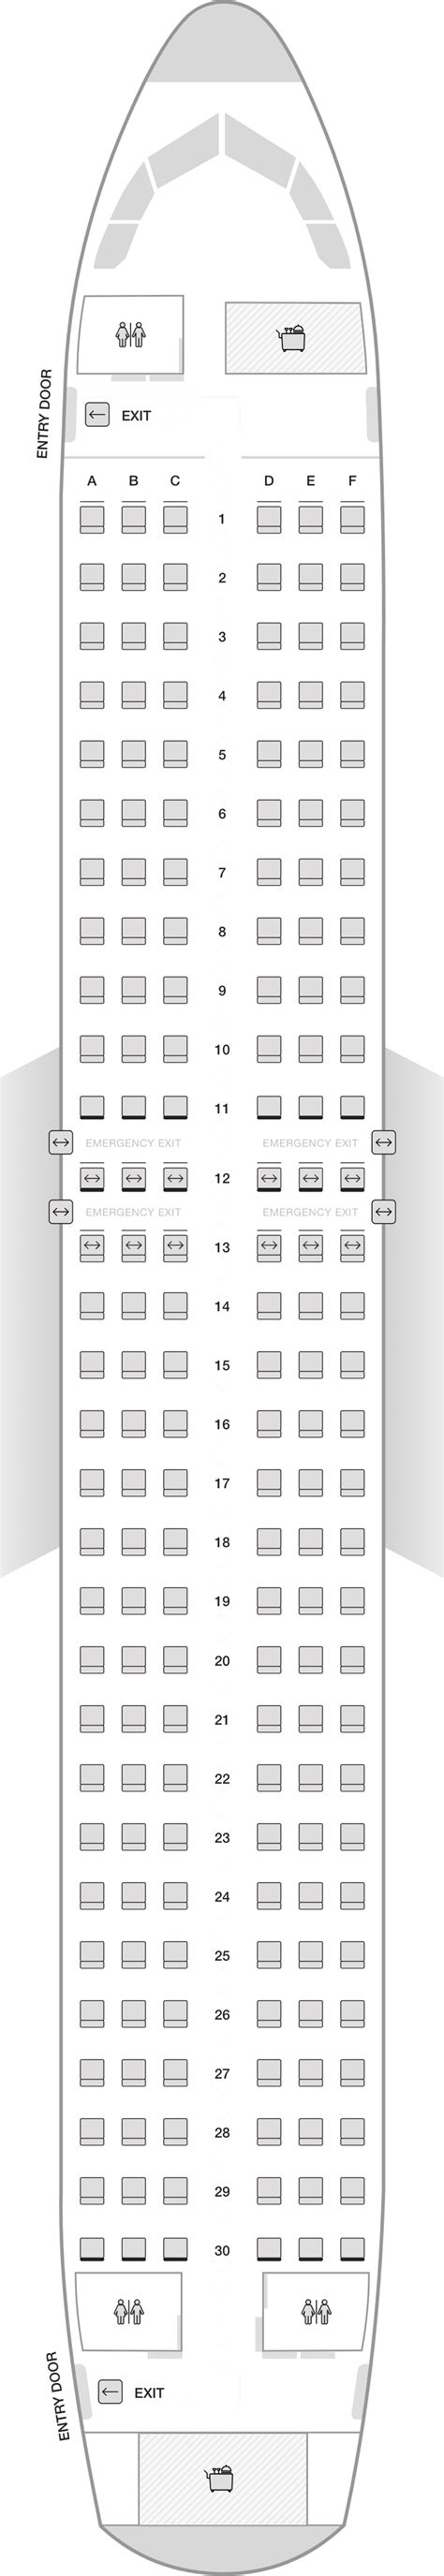 a380 chart airbus a320 seating